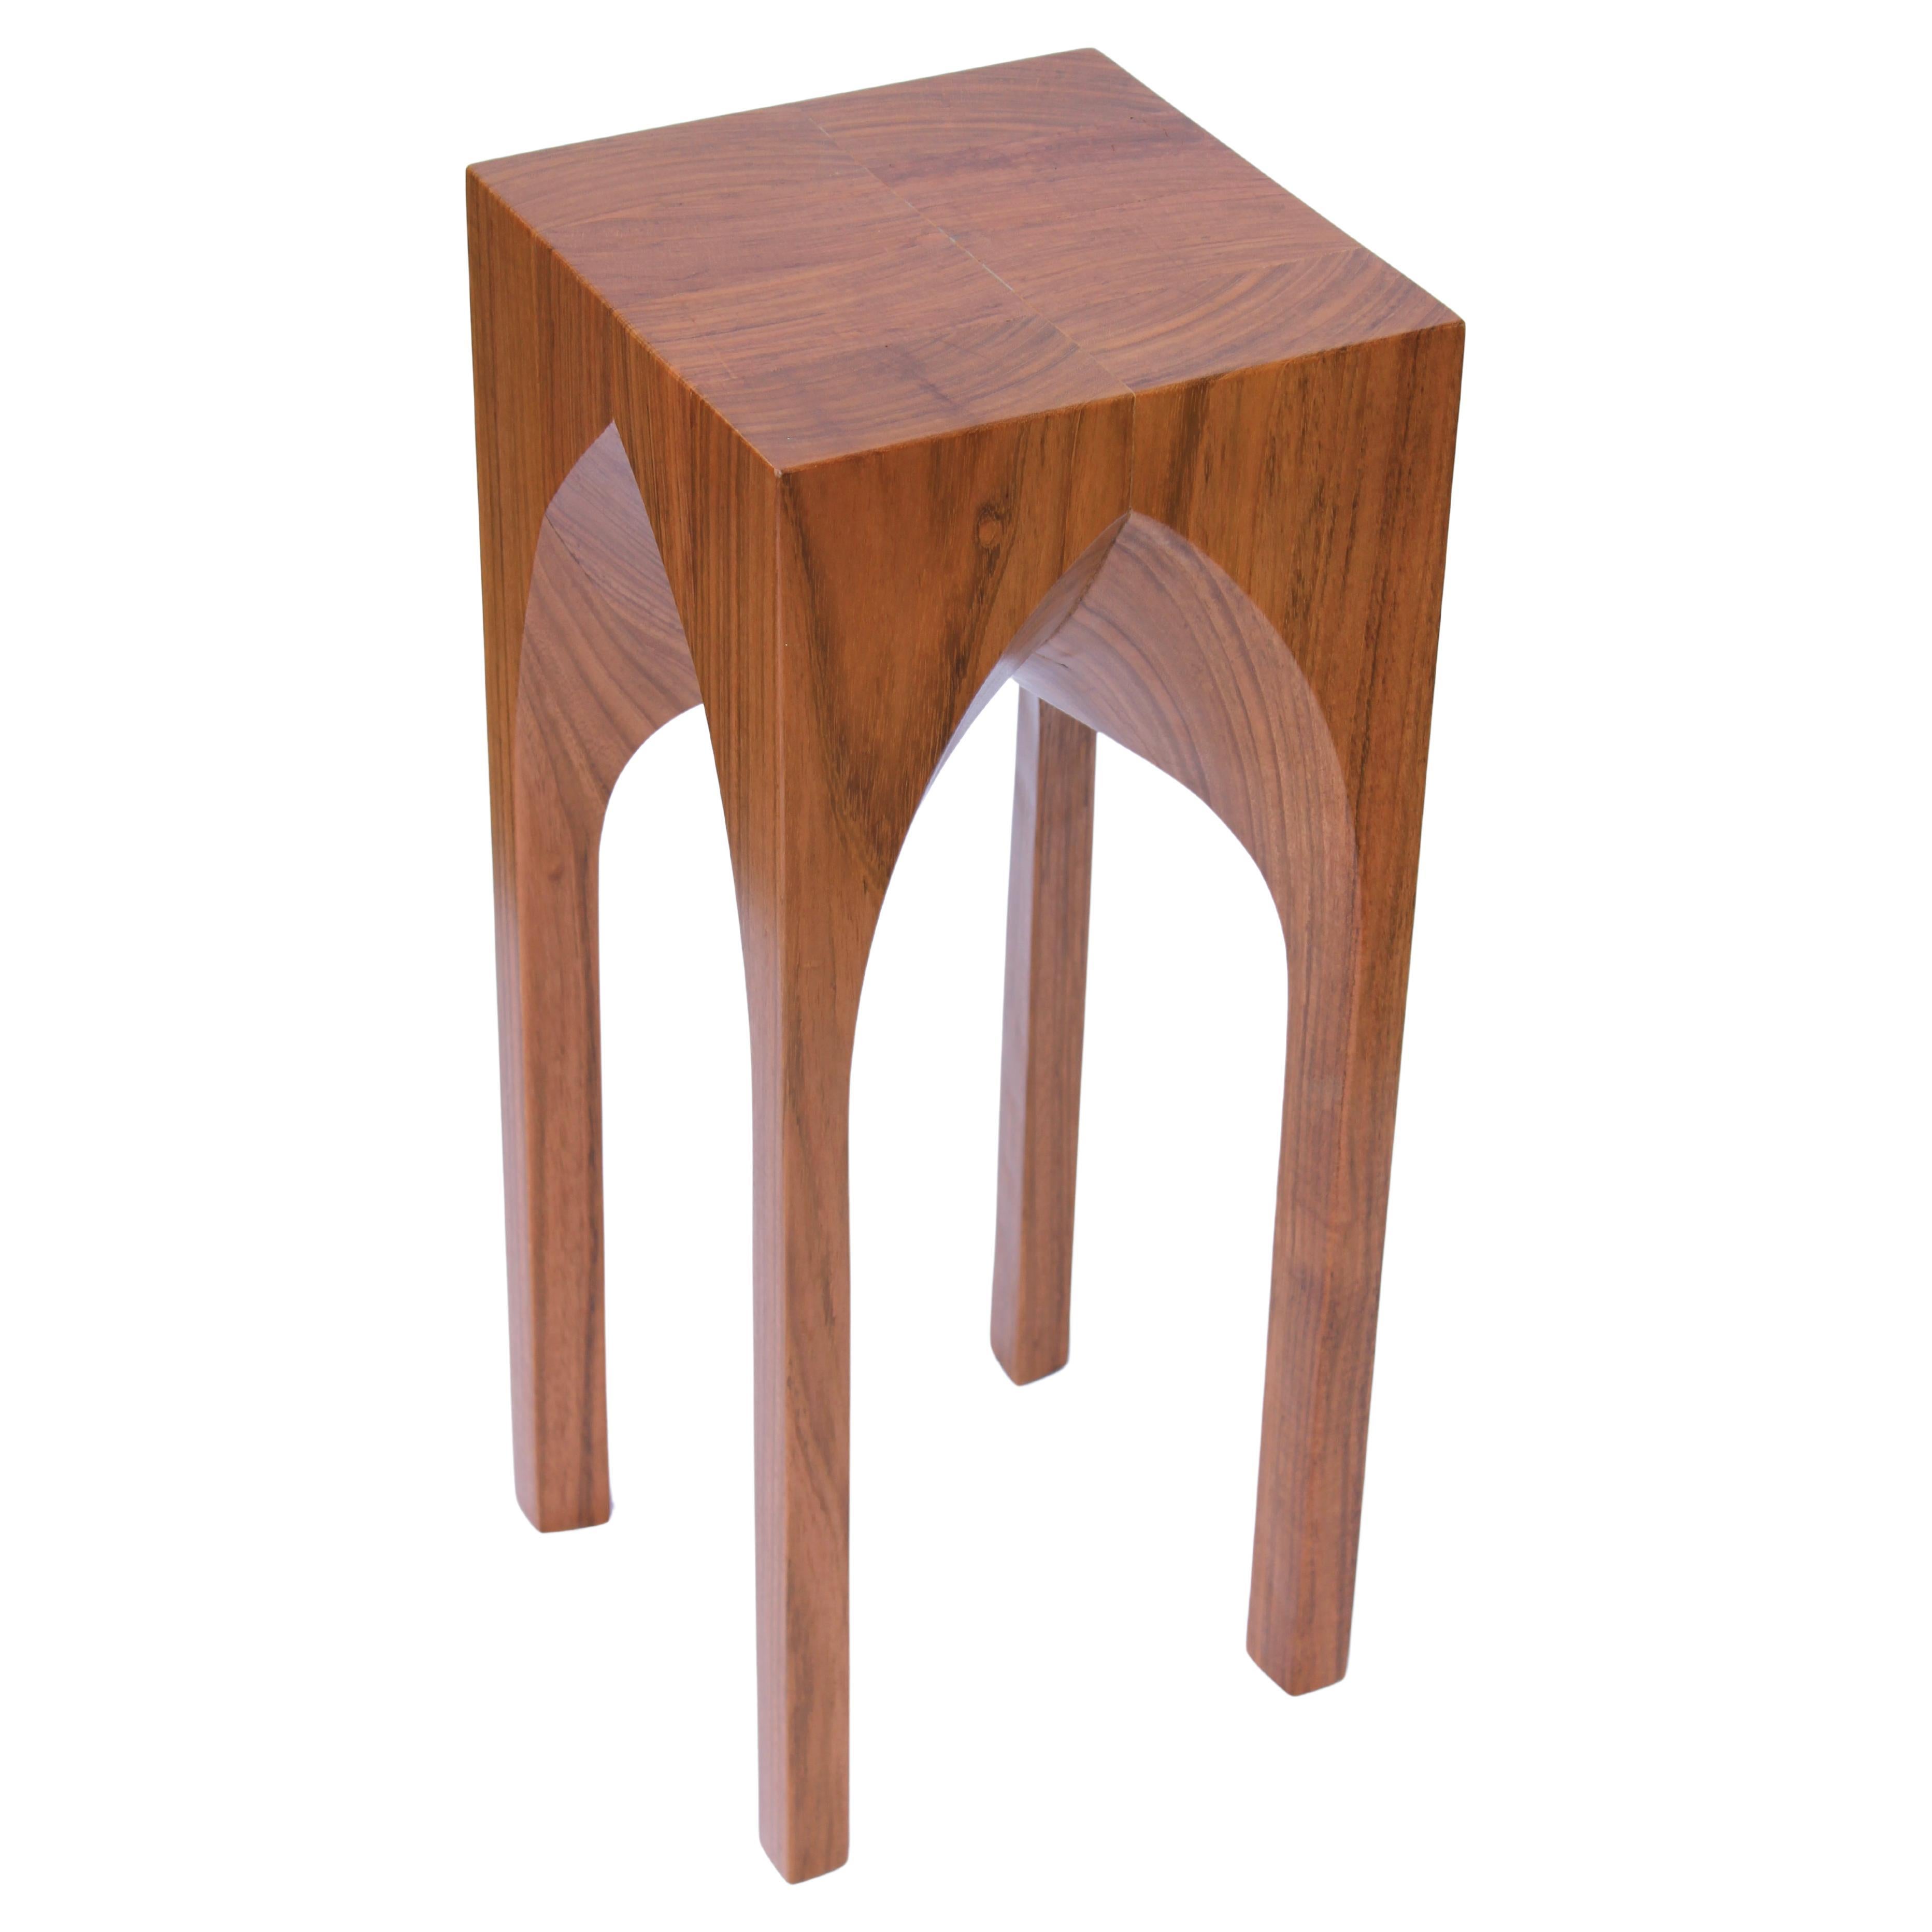 Arch Side Table - Pointed Arch (Jatobá wood) For Sale